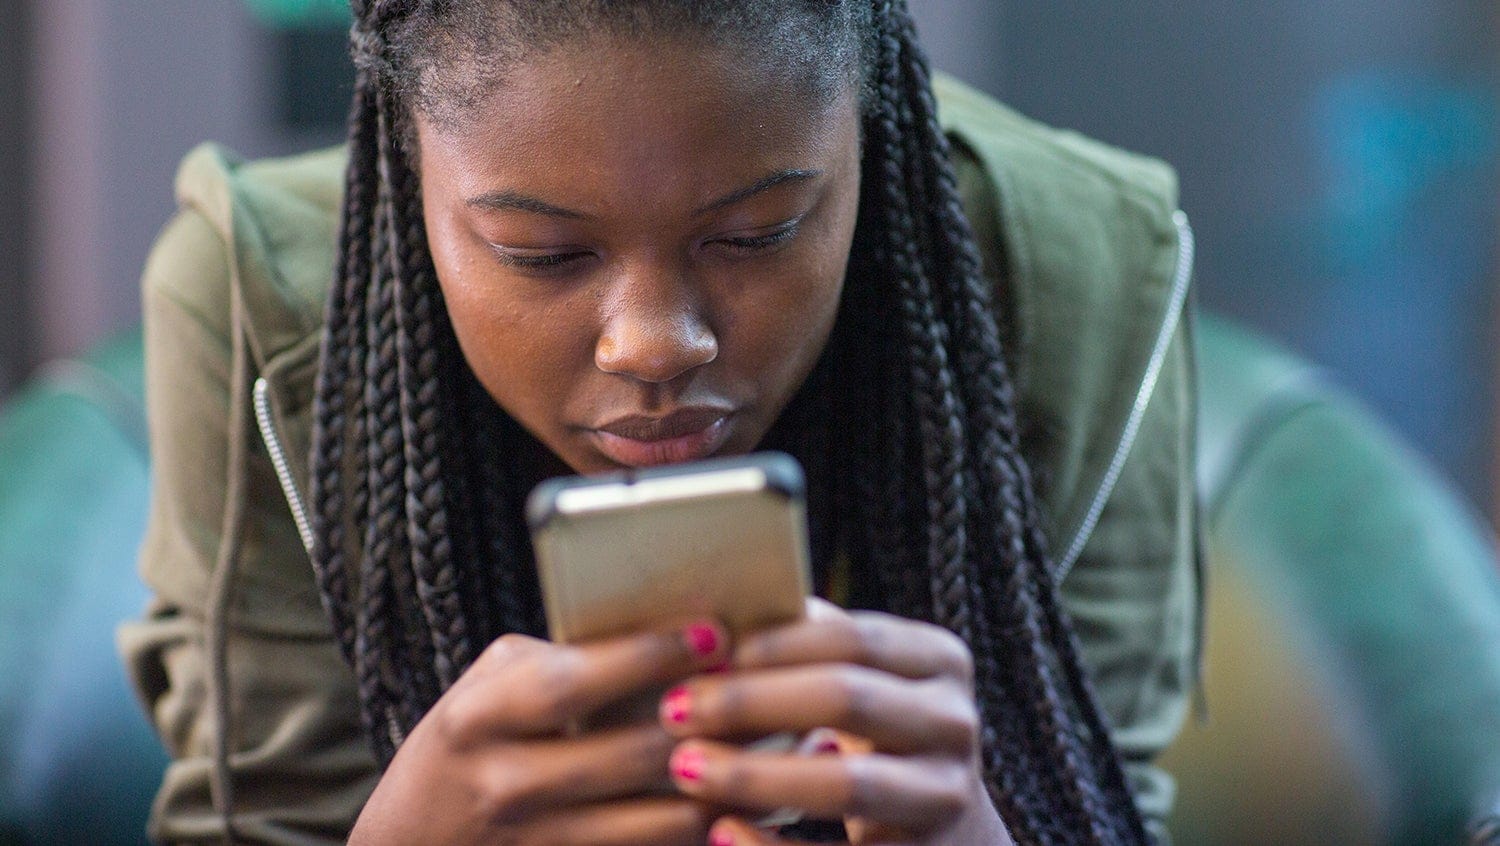 Young black woman stares intently at smartphone screen in her hands